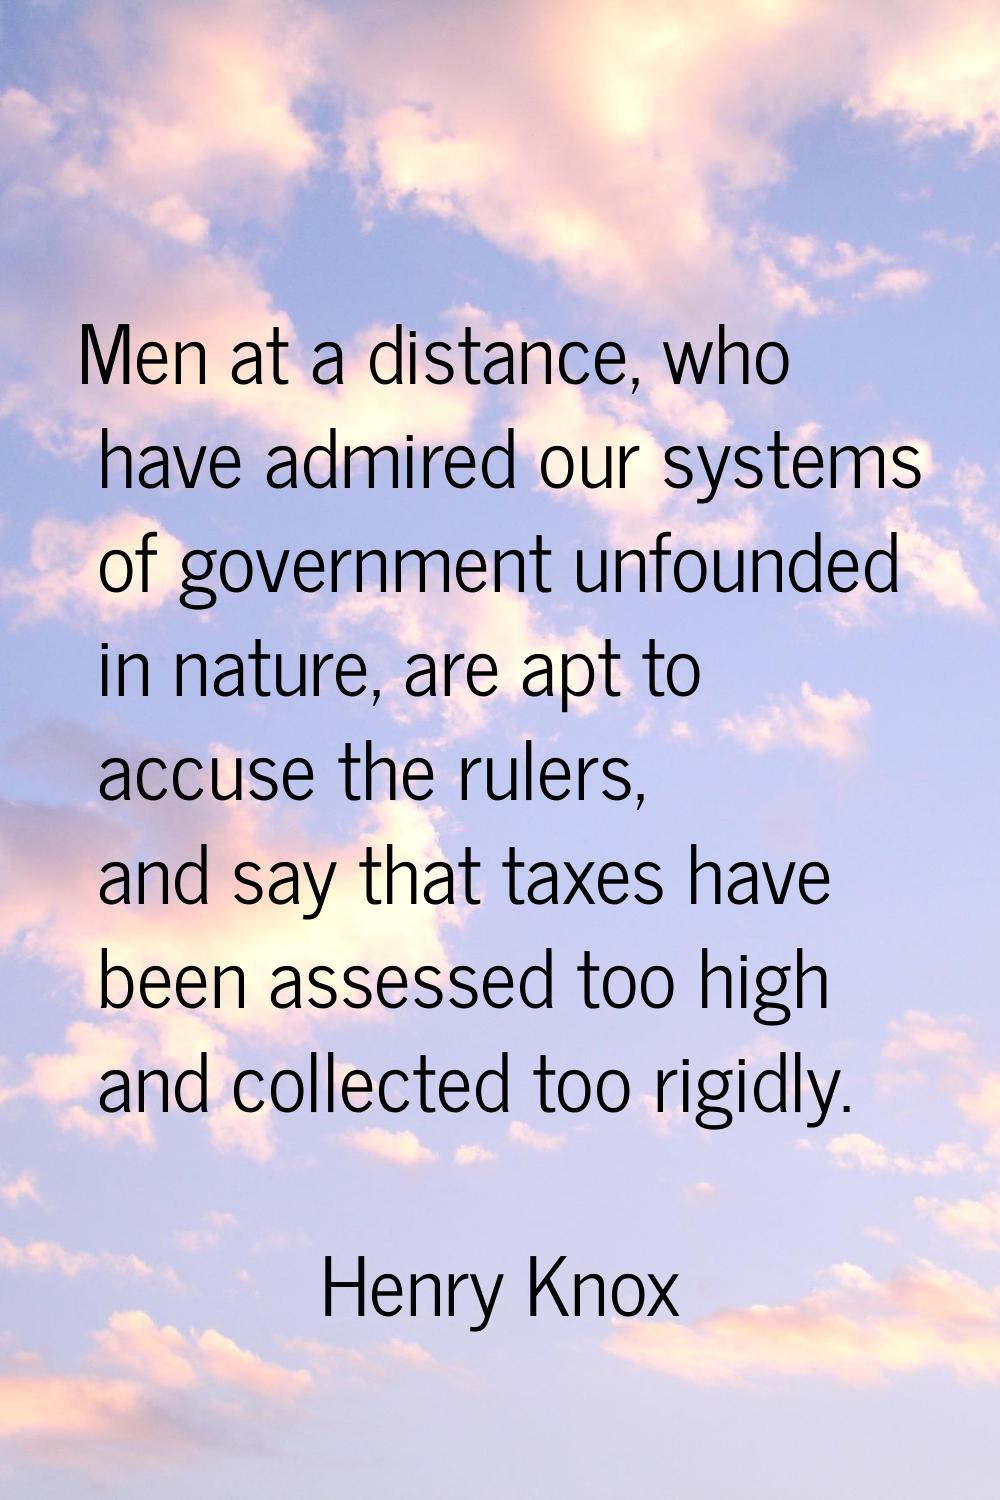 Men at a distance, who have admired our systems of government unfounded in nature, are apt to accus